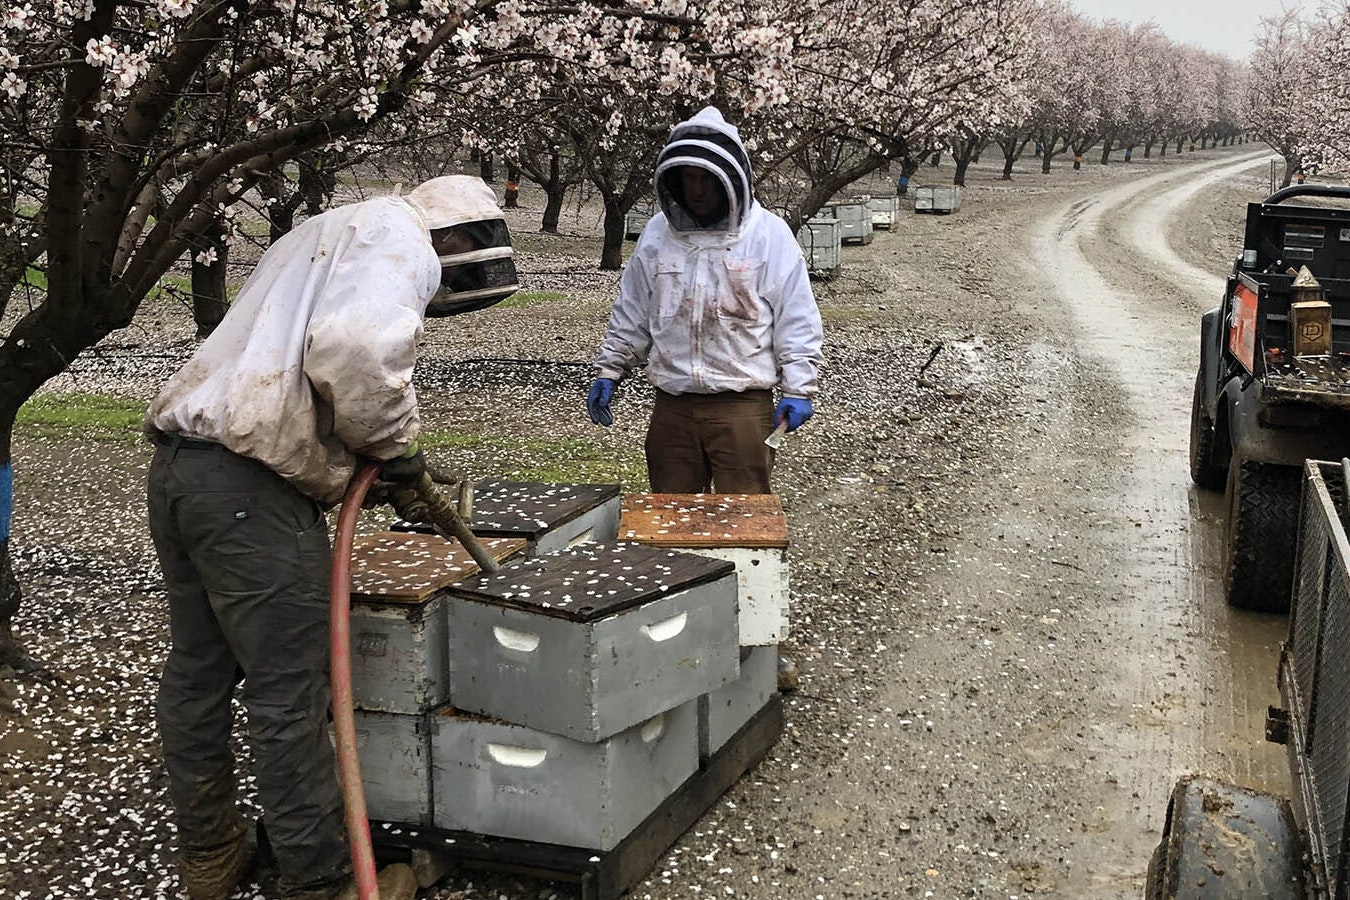 Bryant Honey Inc. of Worland sends thousands of beehives to California to pollinate almond groves. But they must be wary of California bee theft rings.